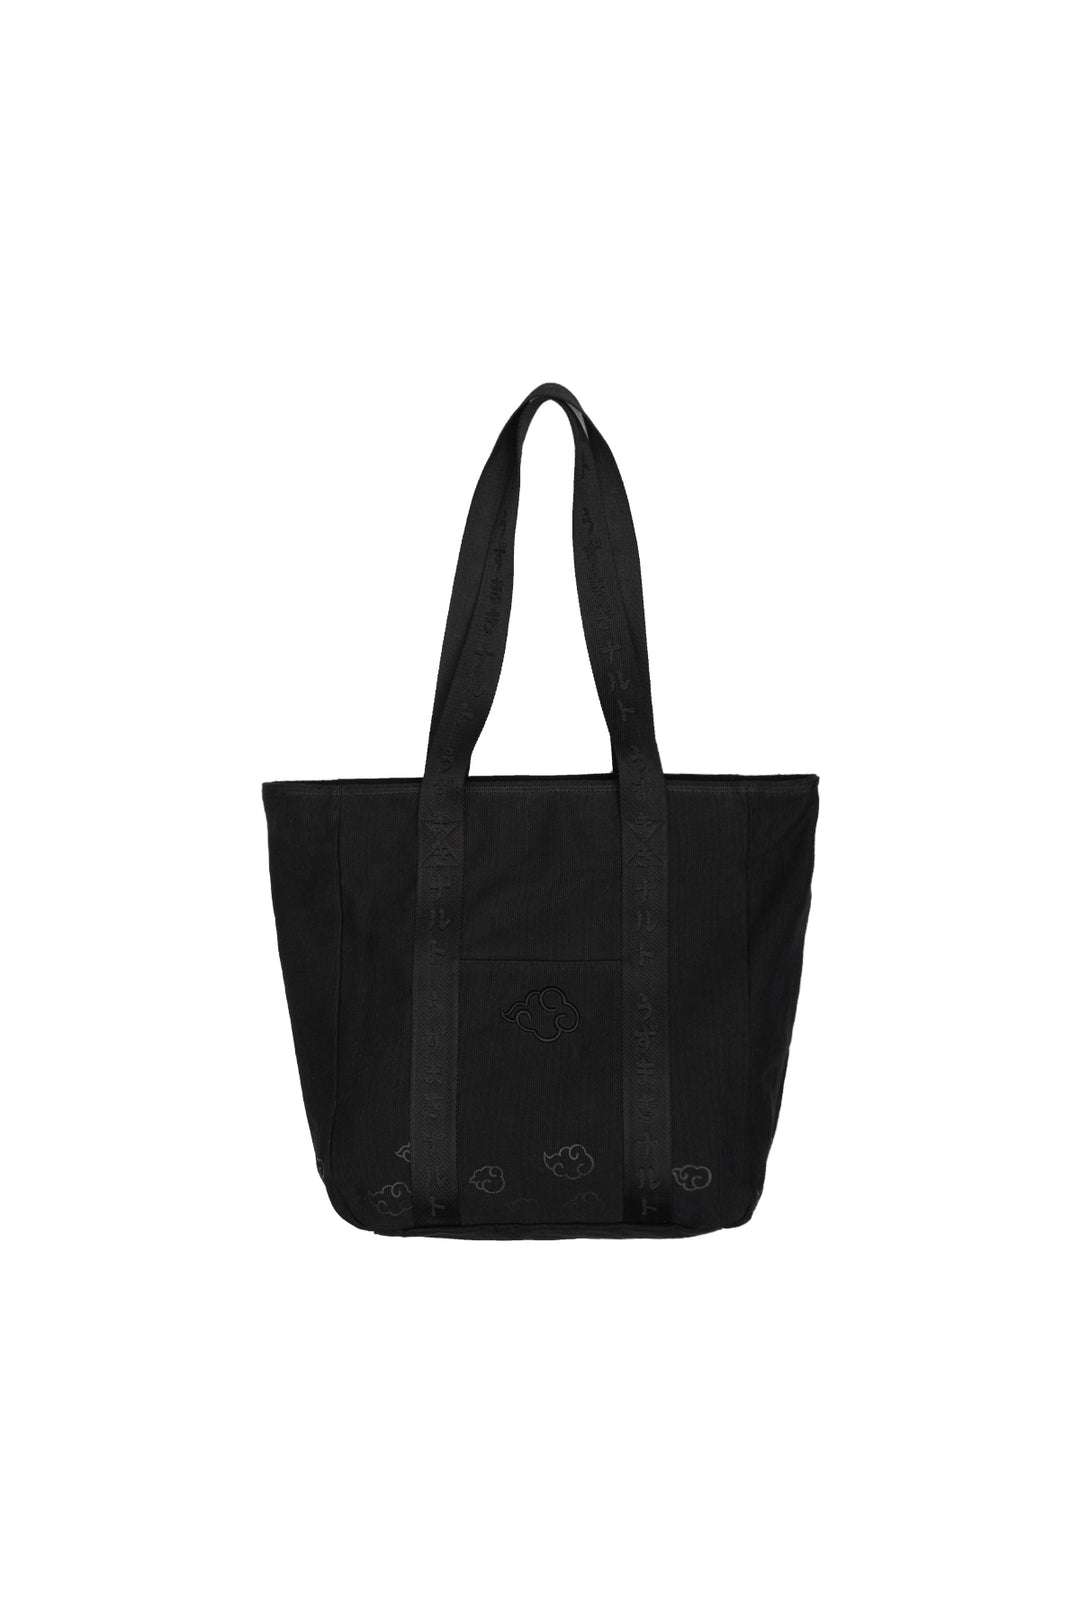 Naruto Shadow Embroidered Tote - Black